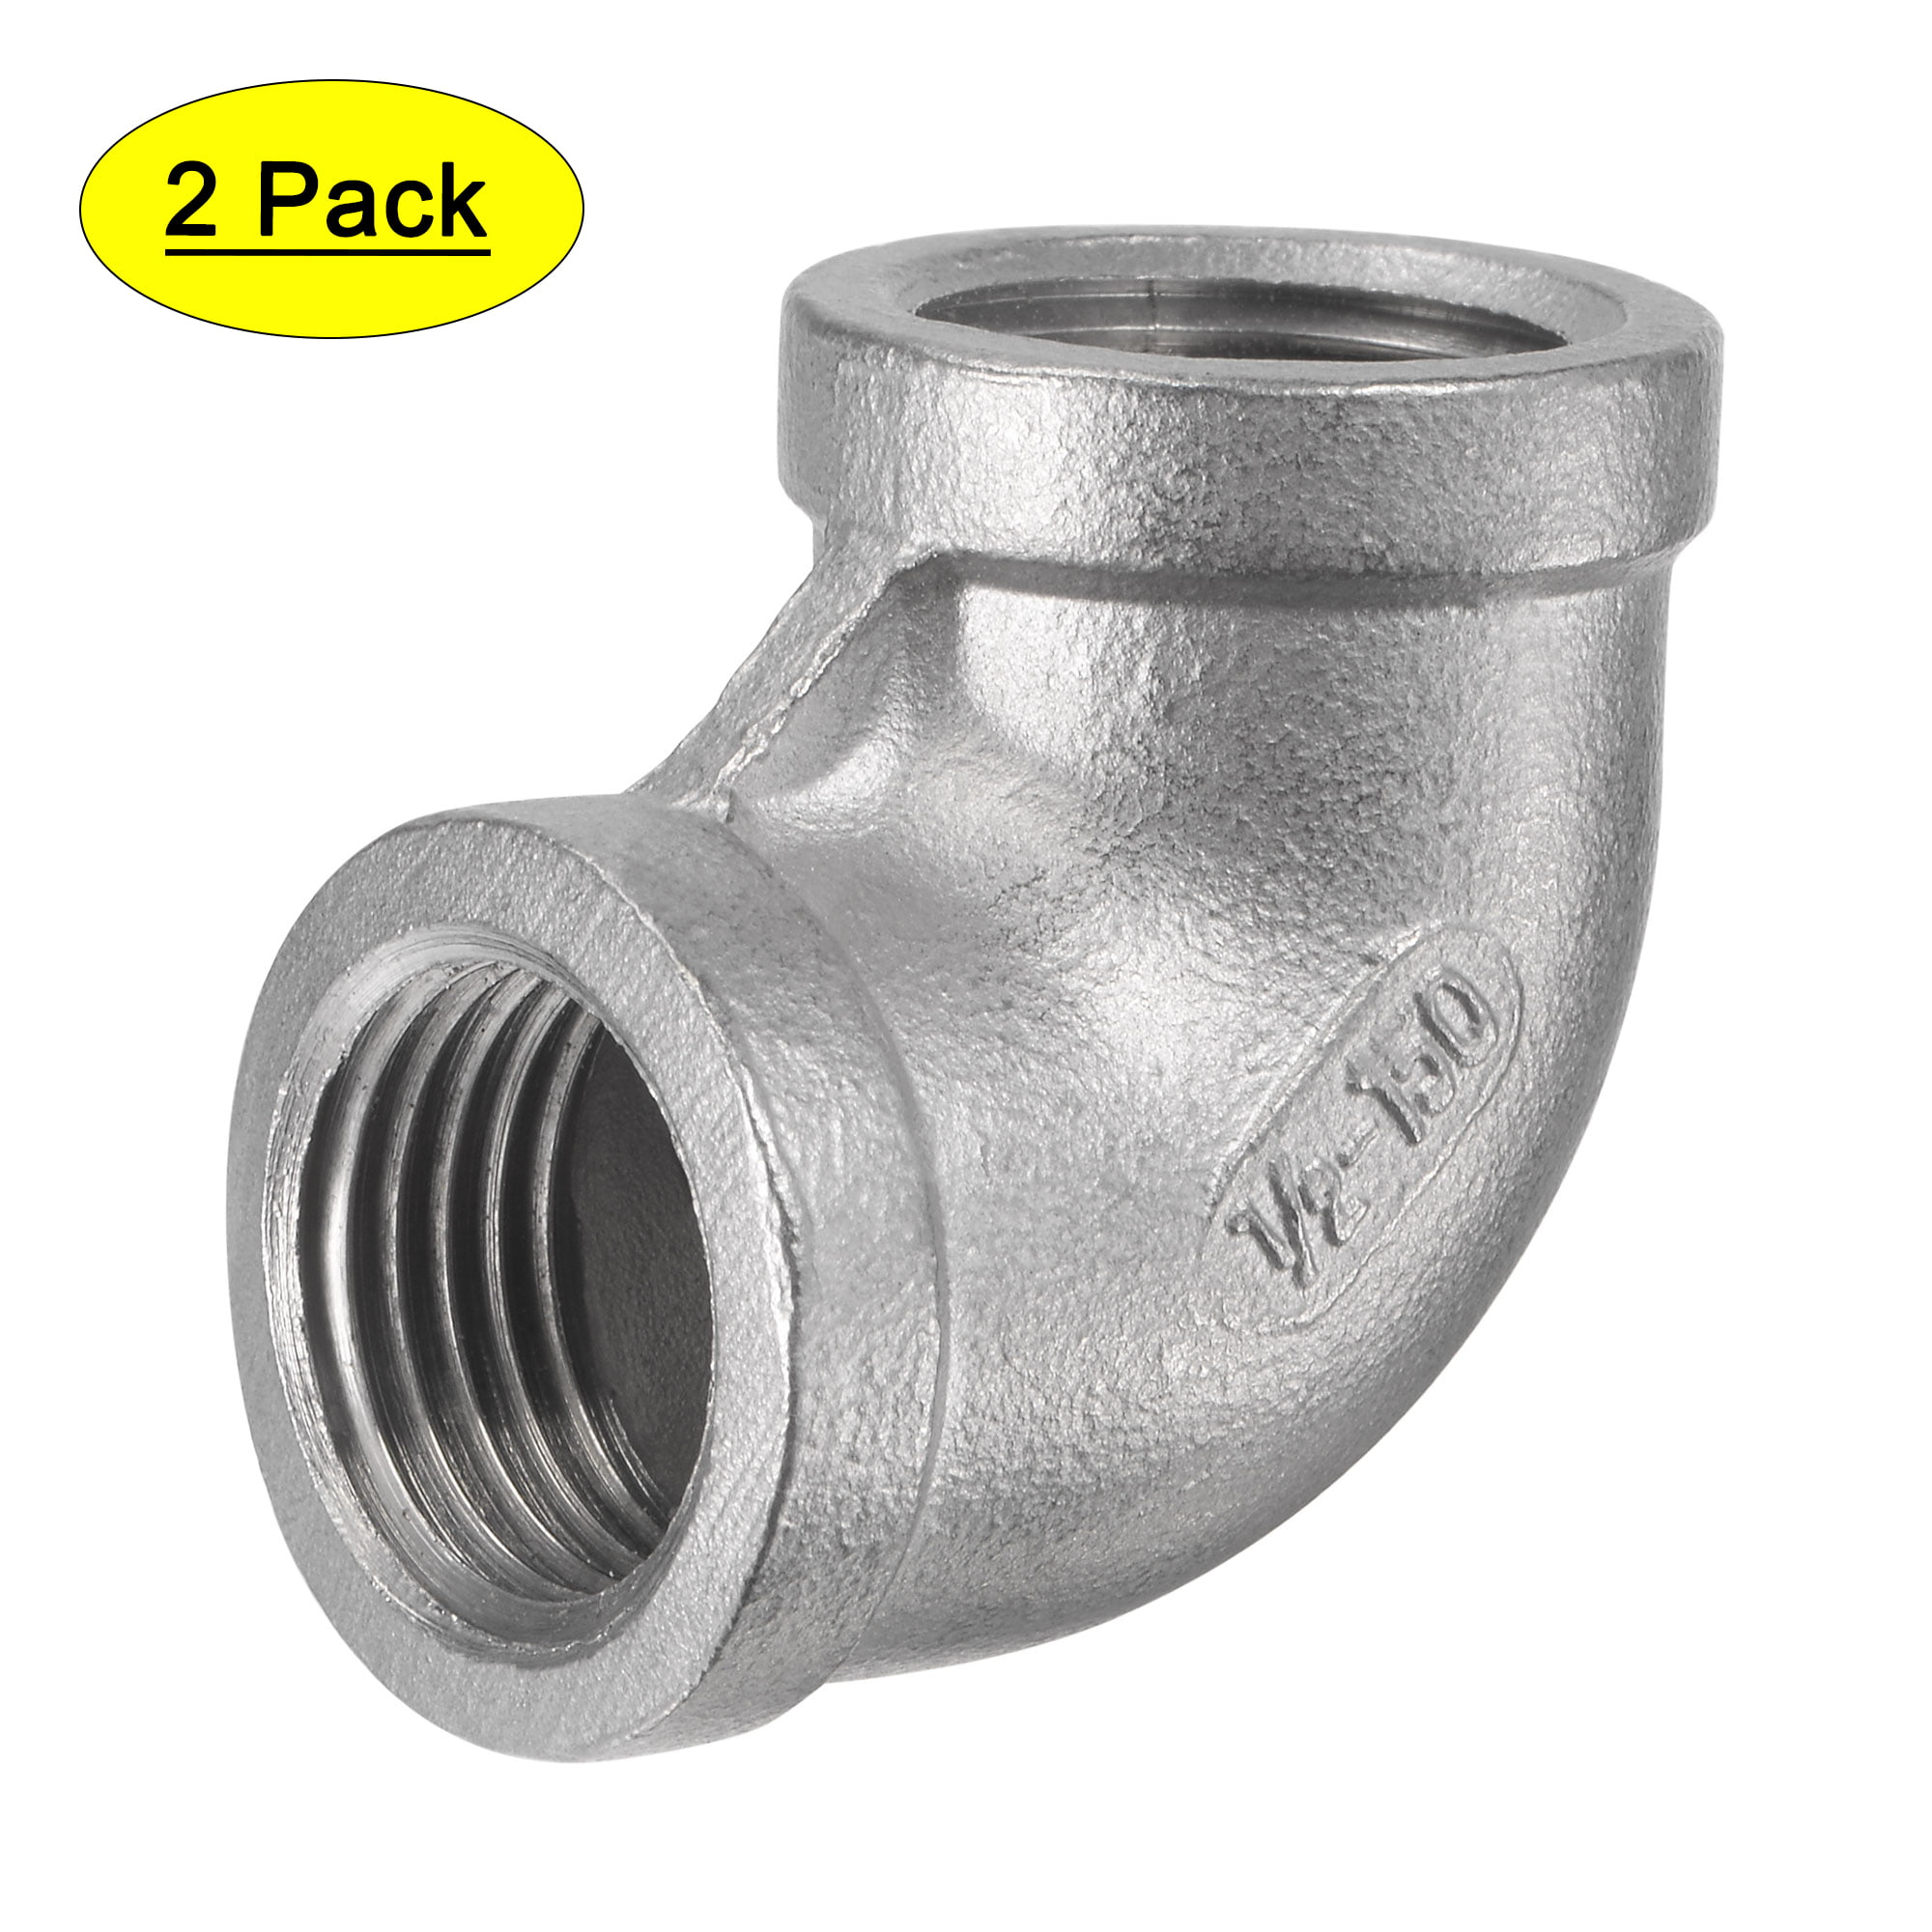 2-1/2" 150 Female NPT 90° Elbow 304 Stainless Steel Pipe Fitting <SS011041304 